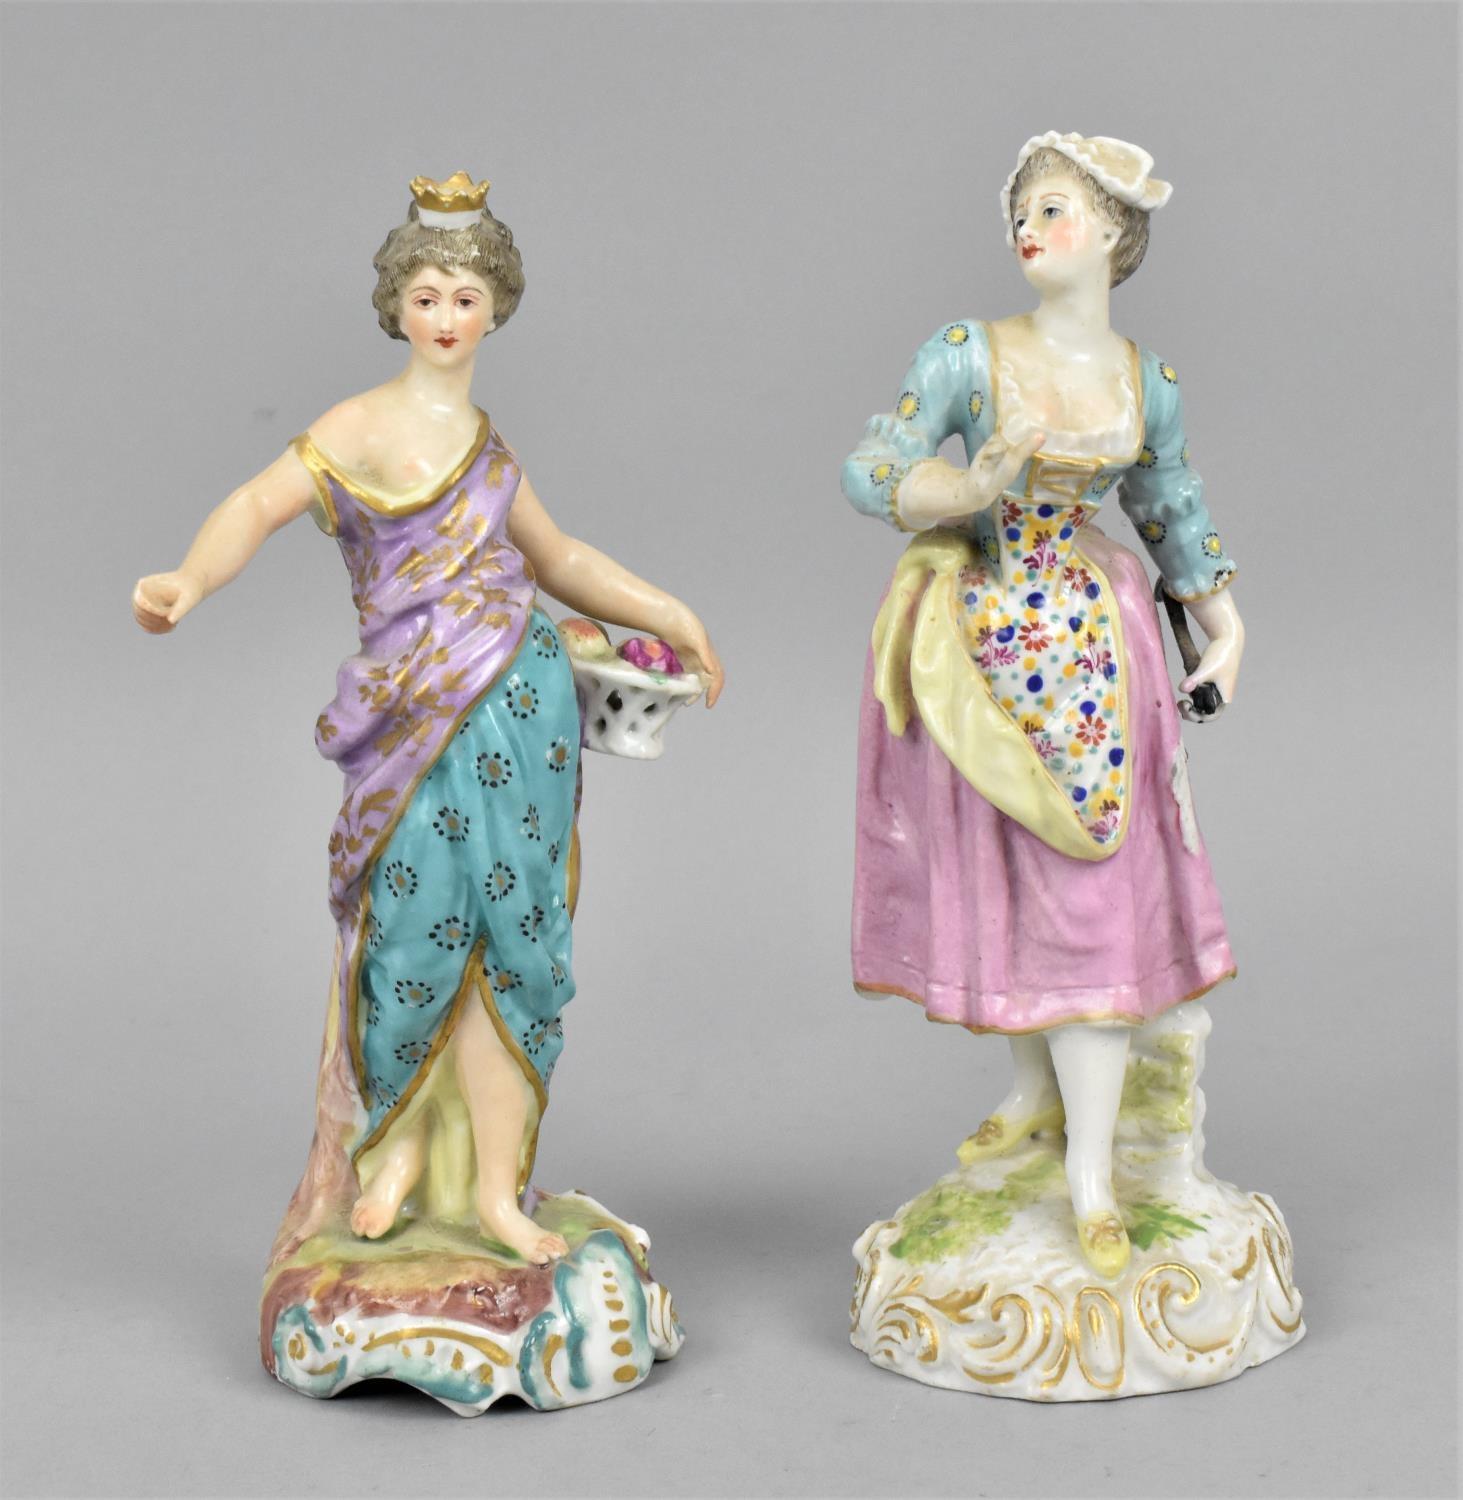 Two early 19th century Royal Crown Derby figures, one modelled as an allegorical figure with crown